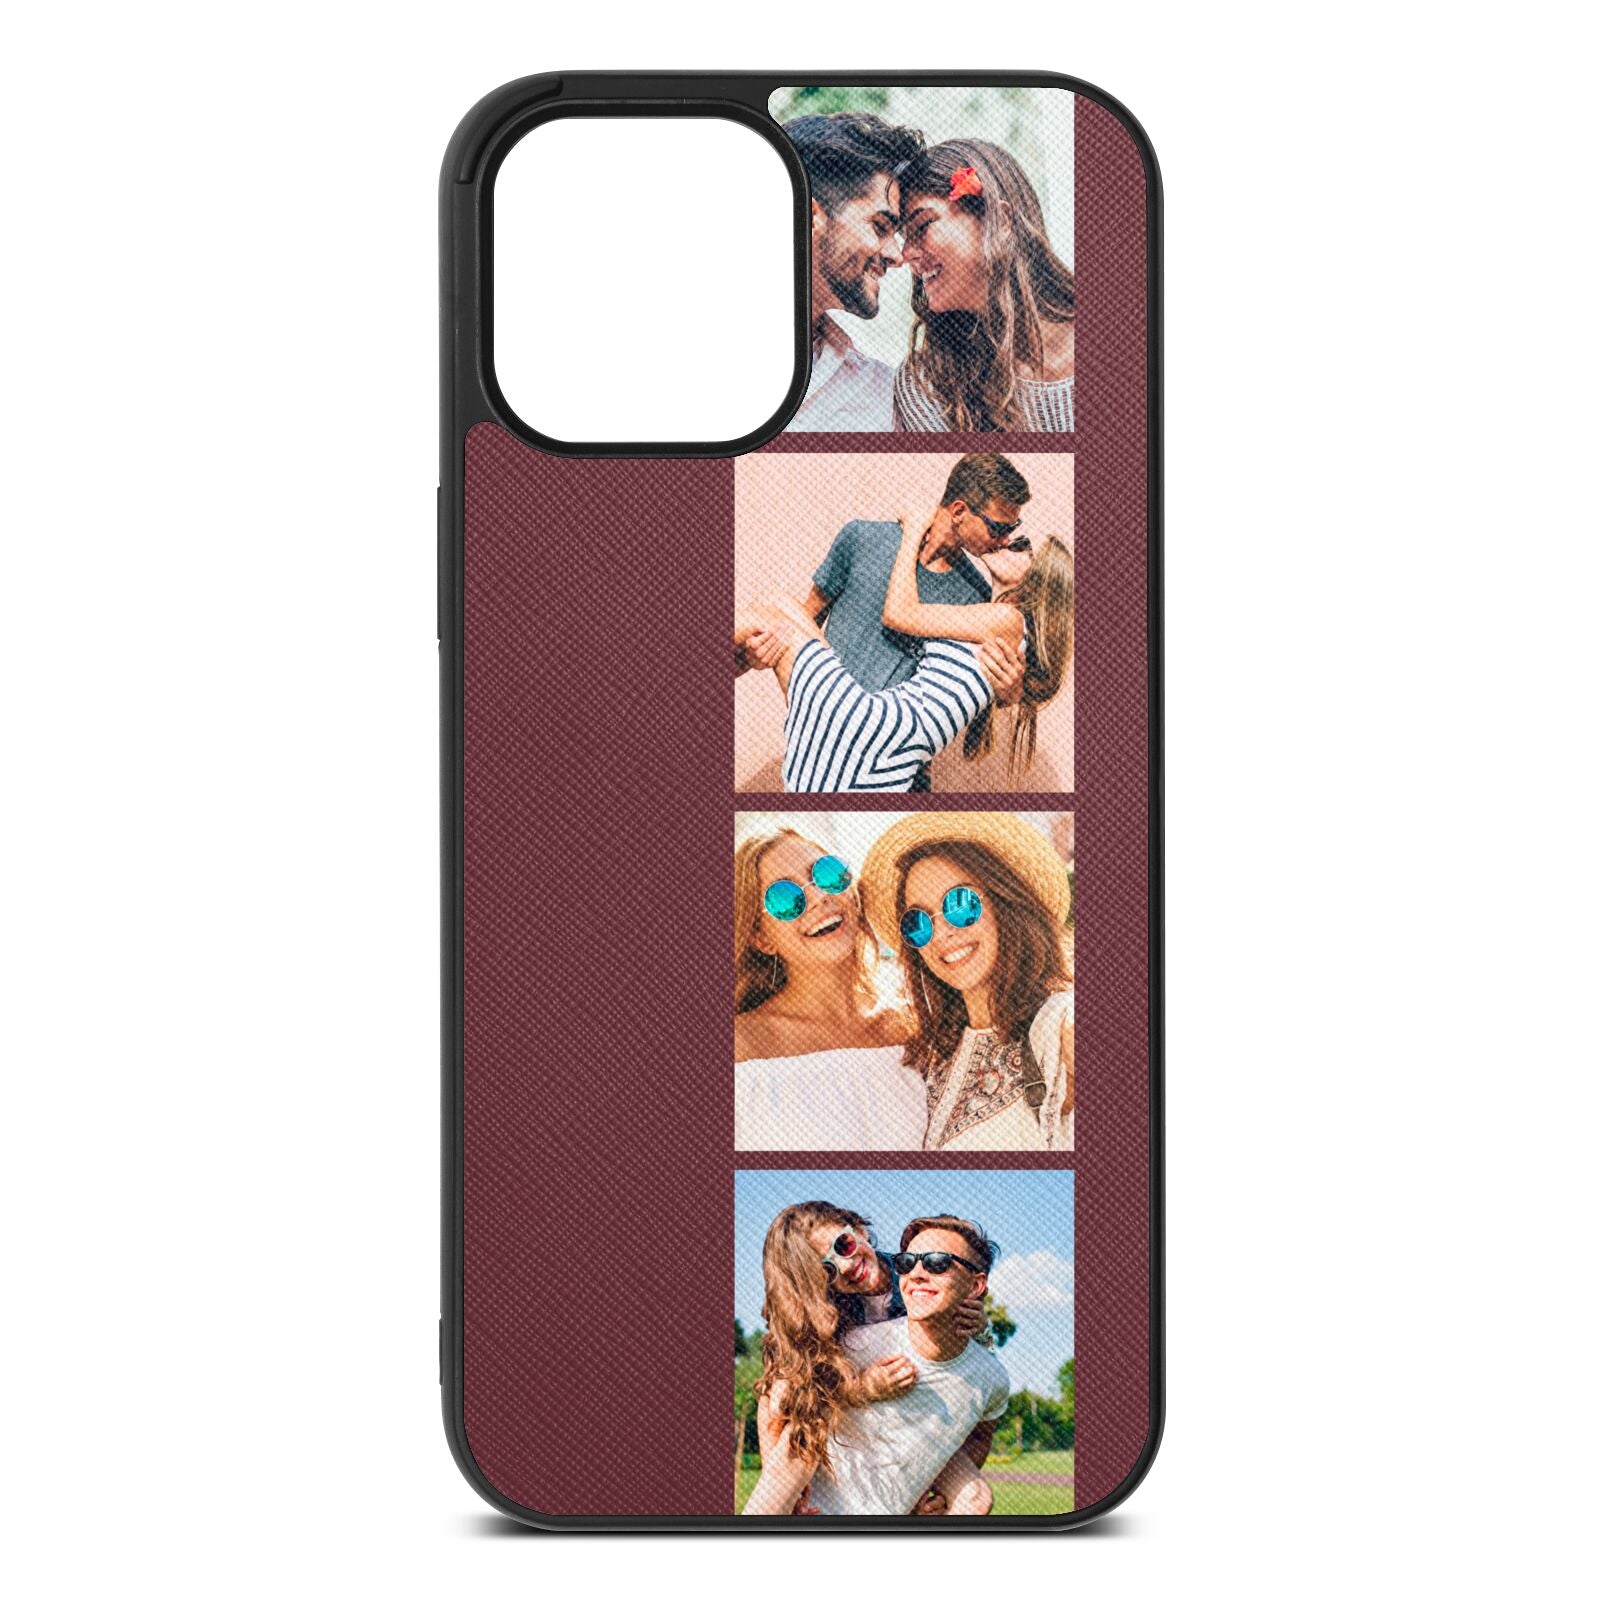 Photo Strip Montage Upload Rose Brown Saffiano Leather iPhone 12 Pro Max Case